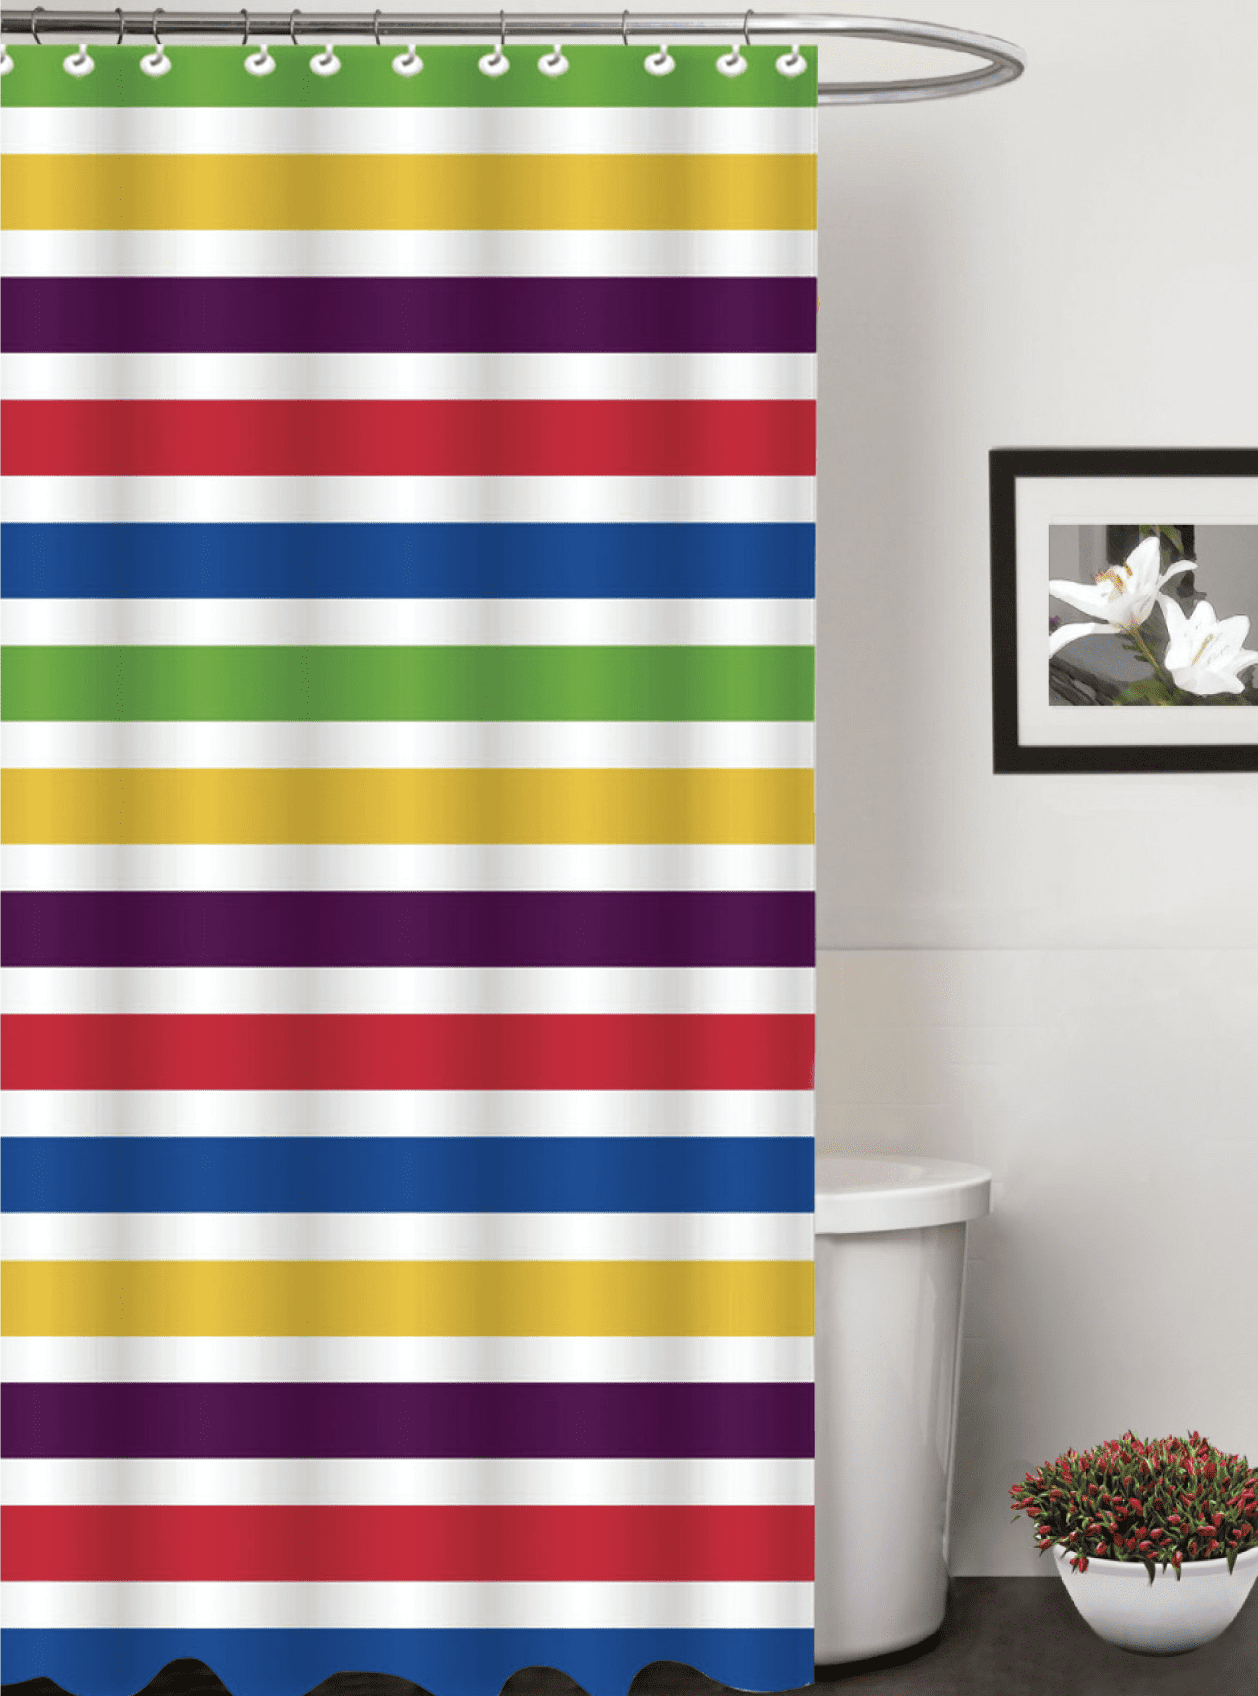 favonian Colorful Rainbow Stripe Fabric Shower Curtain for Bathroom 72 x72 inch Colorful Modern Style Hotel Quality Bath Curtain Set with Hooks